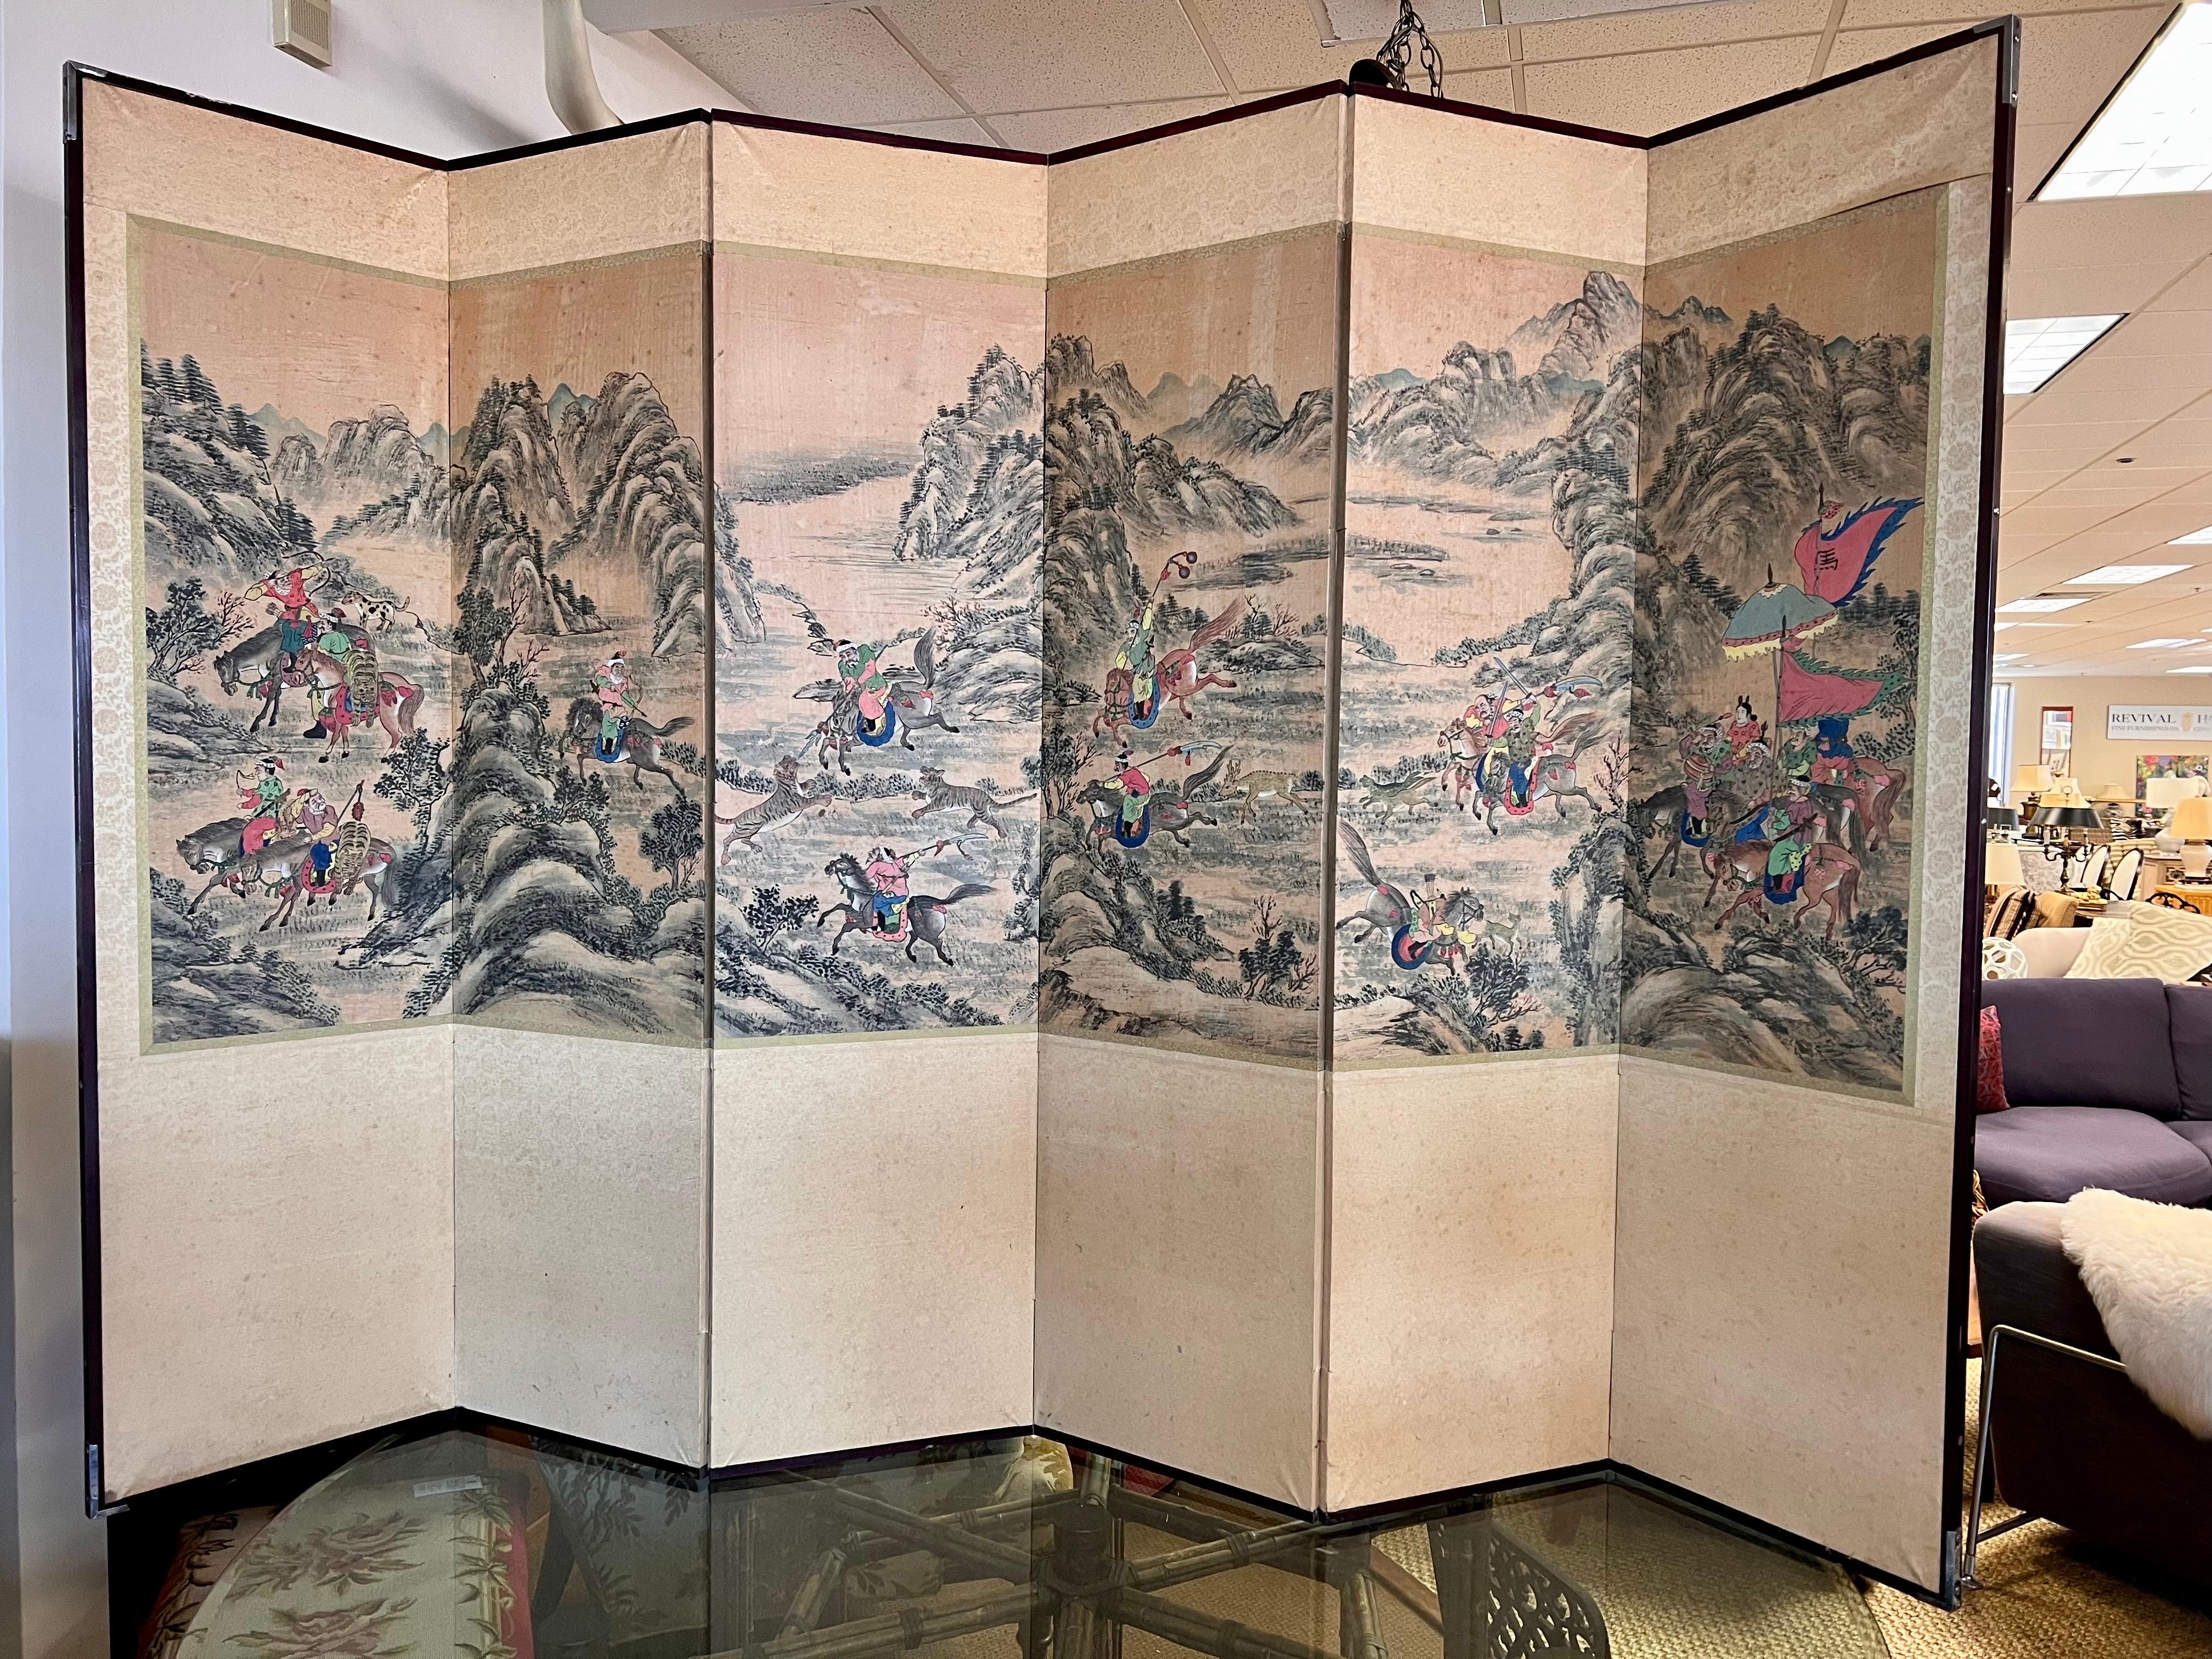 Exquisite six panel Chinese room divider folding screen features intricate handpainted landscape scenery with fighting scenes of warriors on horseback. A stunning visual masterpiece.